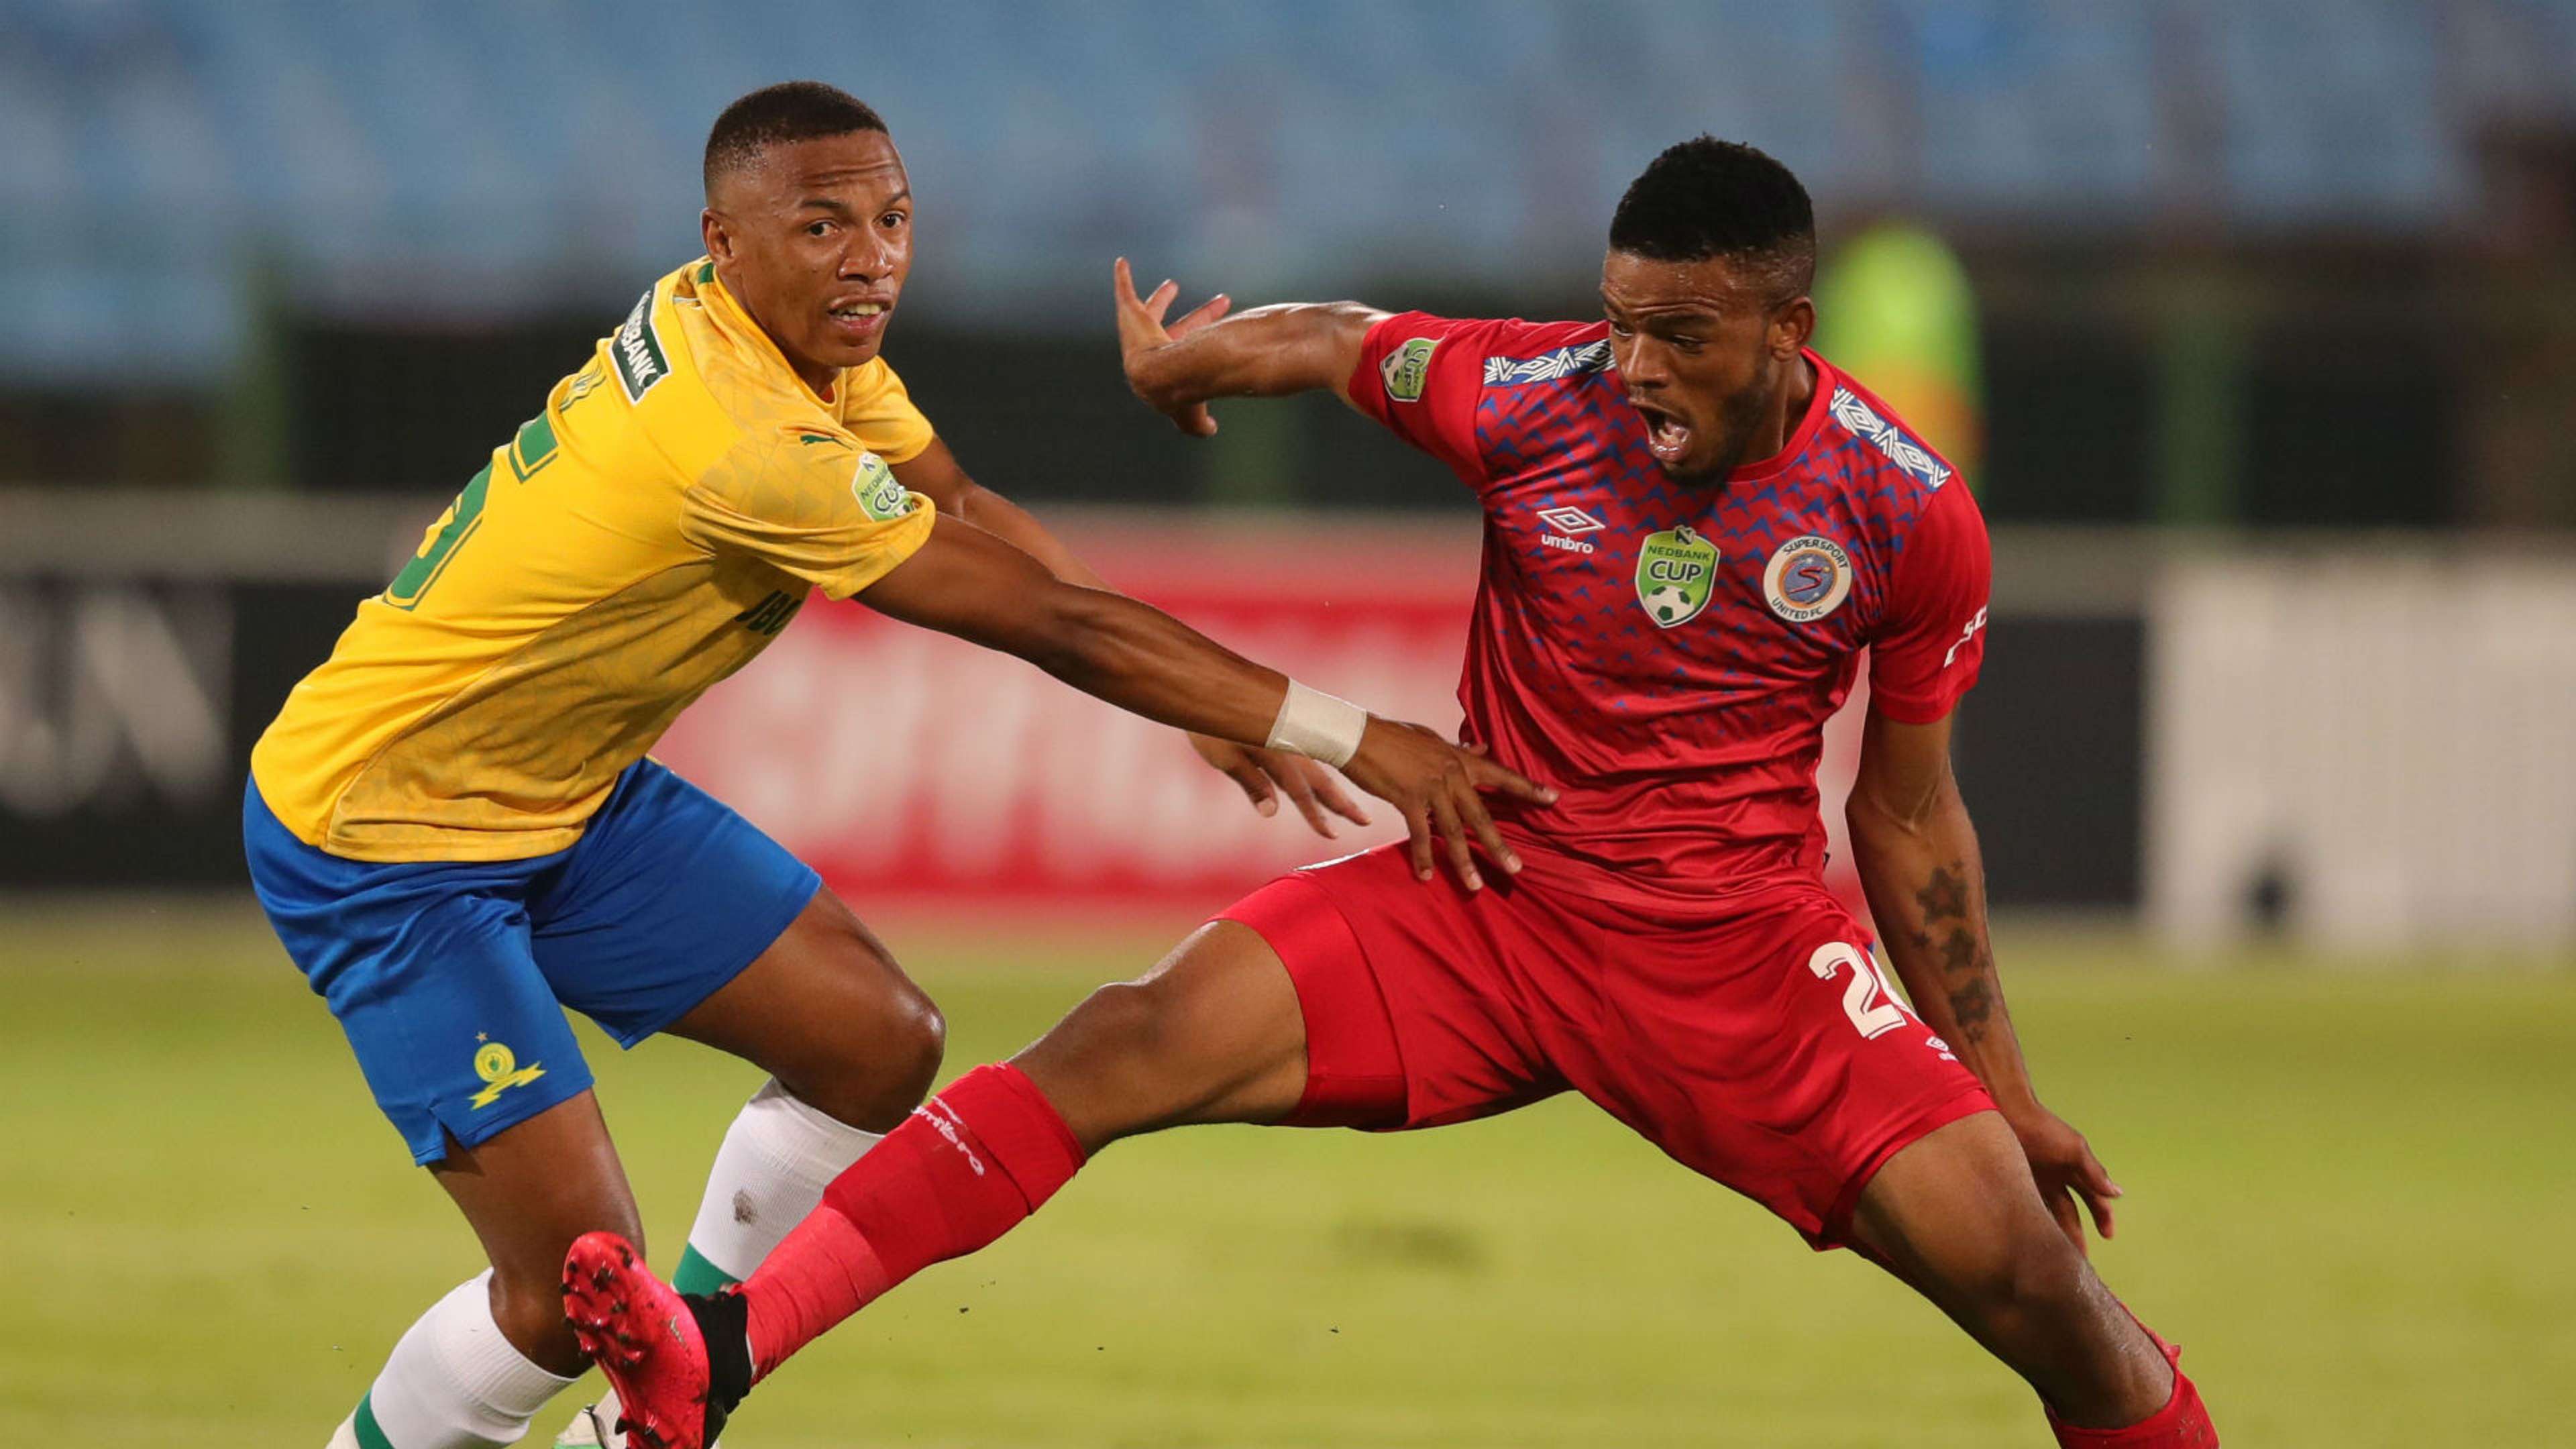 Sipho Mbule of SuperSport United challenged by Andile Jali of Mamelodi Sundowns, February 2020